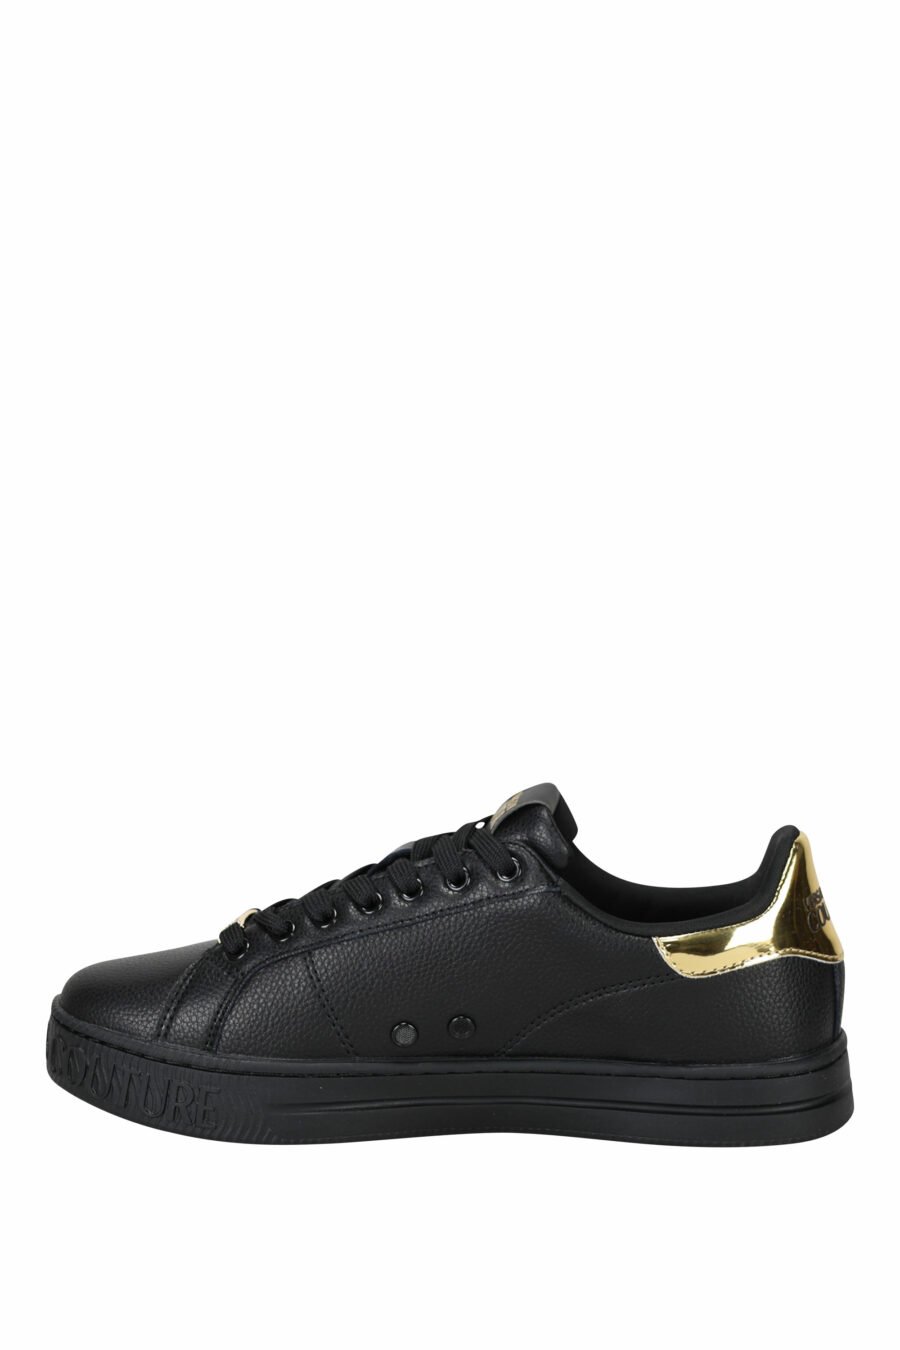 Black leather trainers with gold details and circular logo - 8052019453560 2